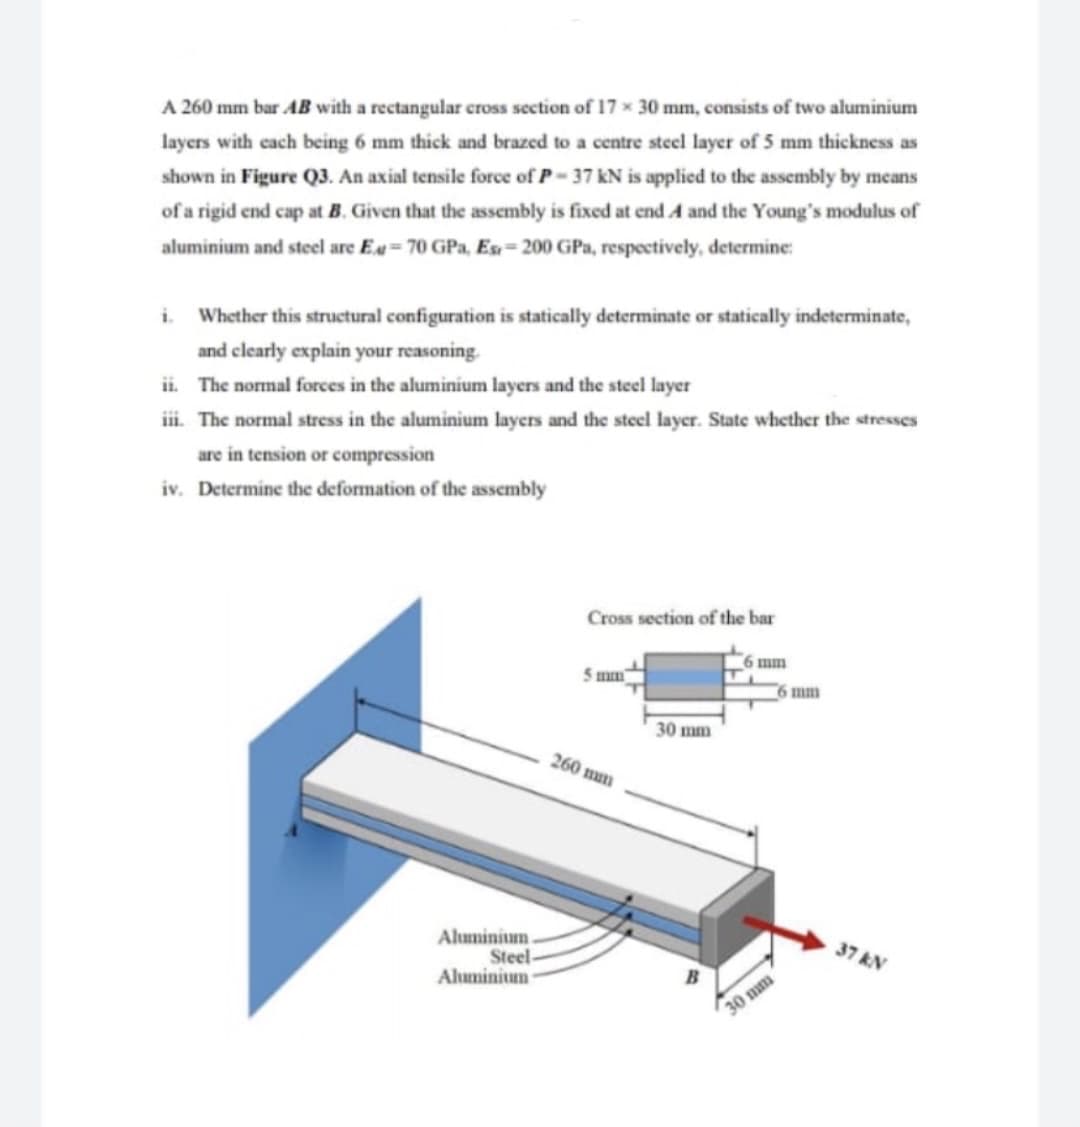 A 260 mm bar AB with a rectangular cross section of 17 x 30 mm, consists of two aluminium
layers with cach being 6 mm thick and brazed to a centre steel layer of 5 mm thickness as
shown in Figure Q3. An axial tensile force of P- 37 kN is applied to the assembly by means
of a rigid end cap at B. Given that the assembly is fixed at end A and the Young's modulus of
aluminium and steel are E.= 70 GPa, Es= 200 GPa, respectively, determine:
i Whether this structural configuration is statically determinate or statically indeterminate,
and clearly explain your reasoning.
ii. The normal forces in the aluminium layers and the steel layer
i. The normal stress in the aluminium layers and the steel layer. State whether the stresses
are in tension or compression
iv. Determine the deformation of the assembly
Cross section of the bar
6 mm
5 mm
6 mm
30 mm
260 mun
Aluminium.
Steel-
Aluminitum
Nא 37
30 mm
